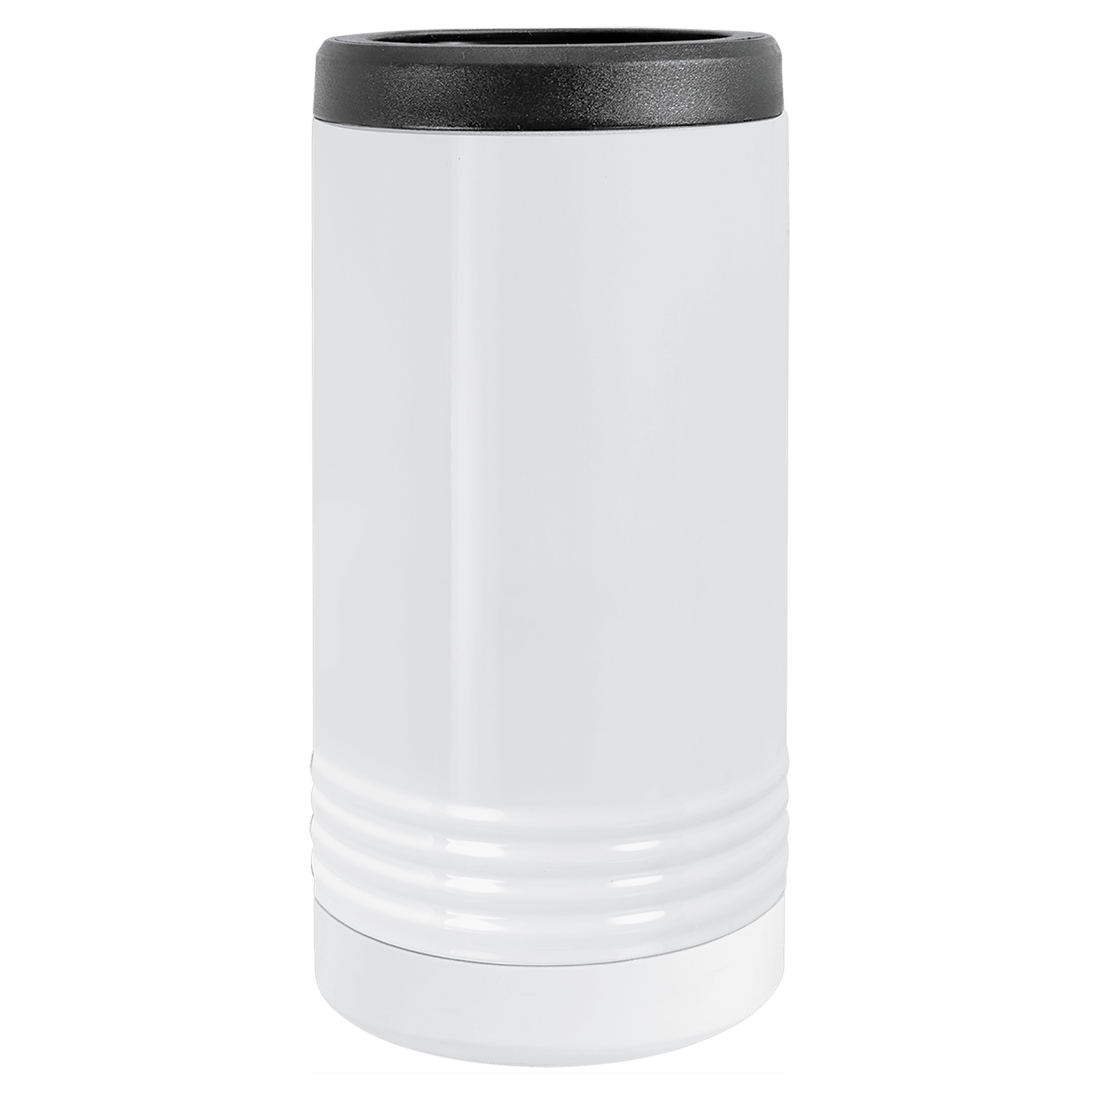 A slim stainless steel beverage holder with vacuum insulation.